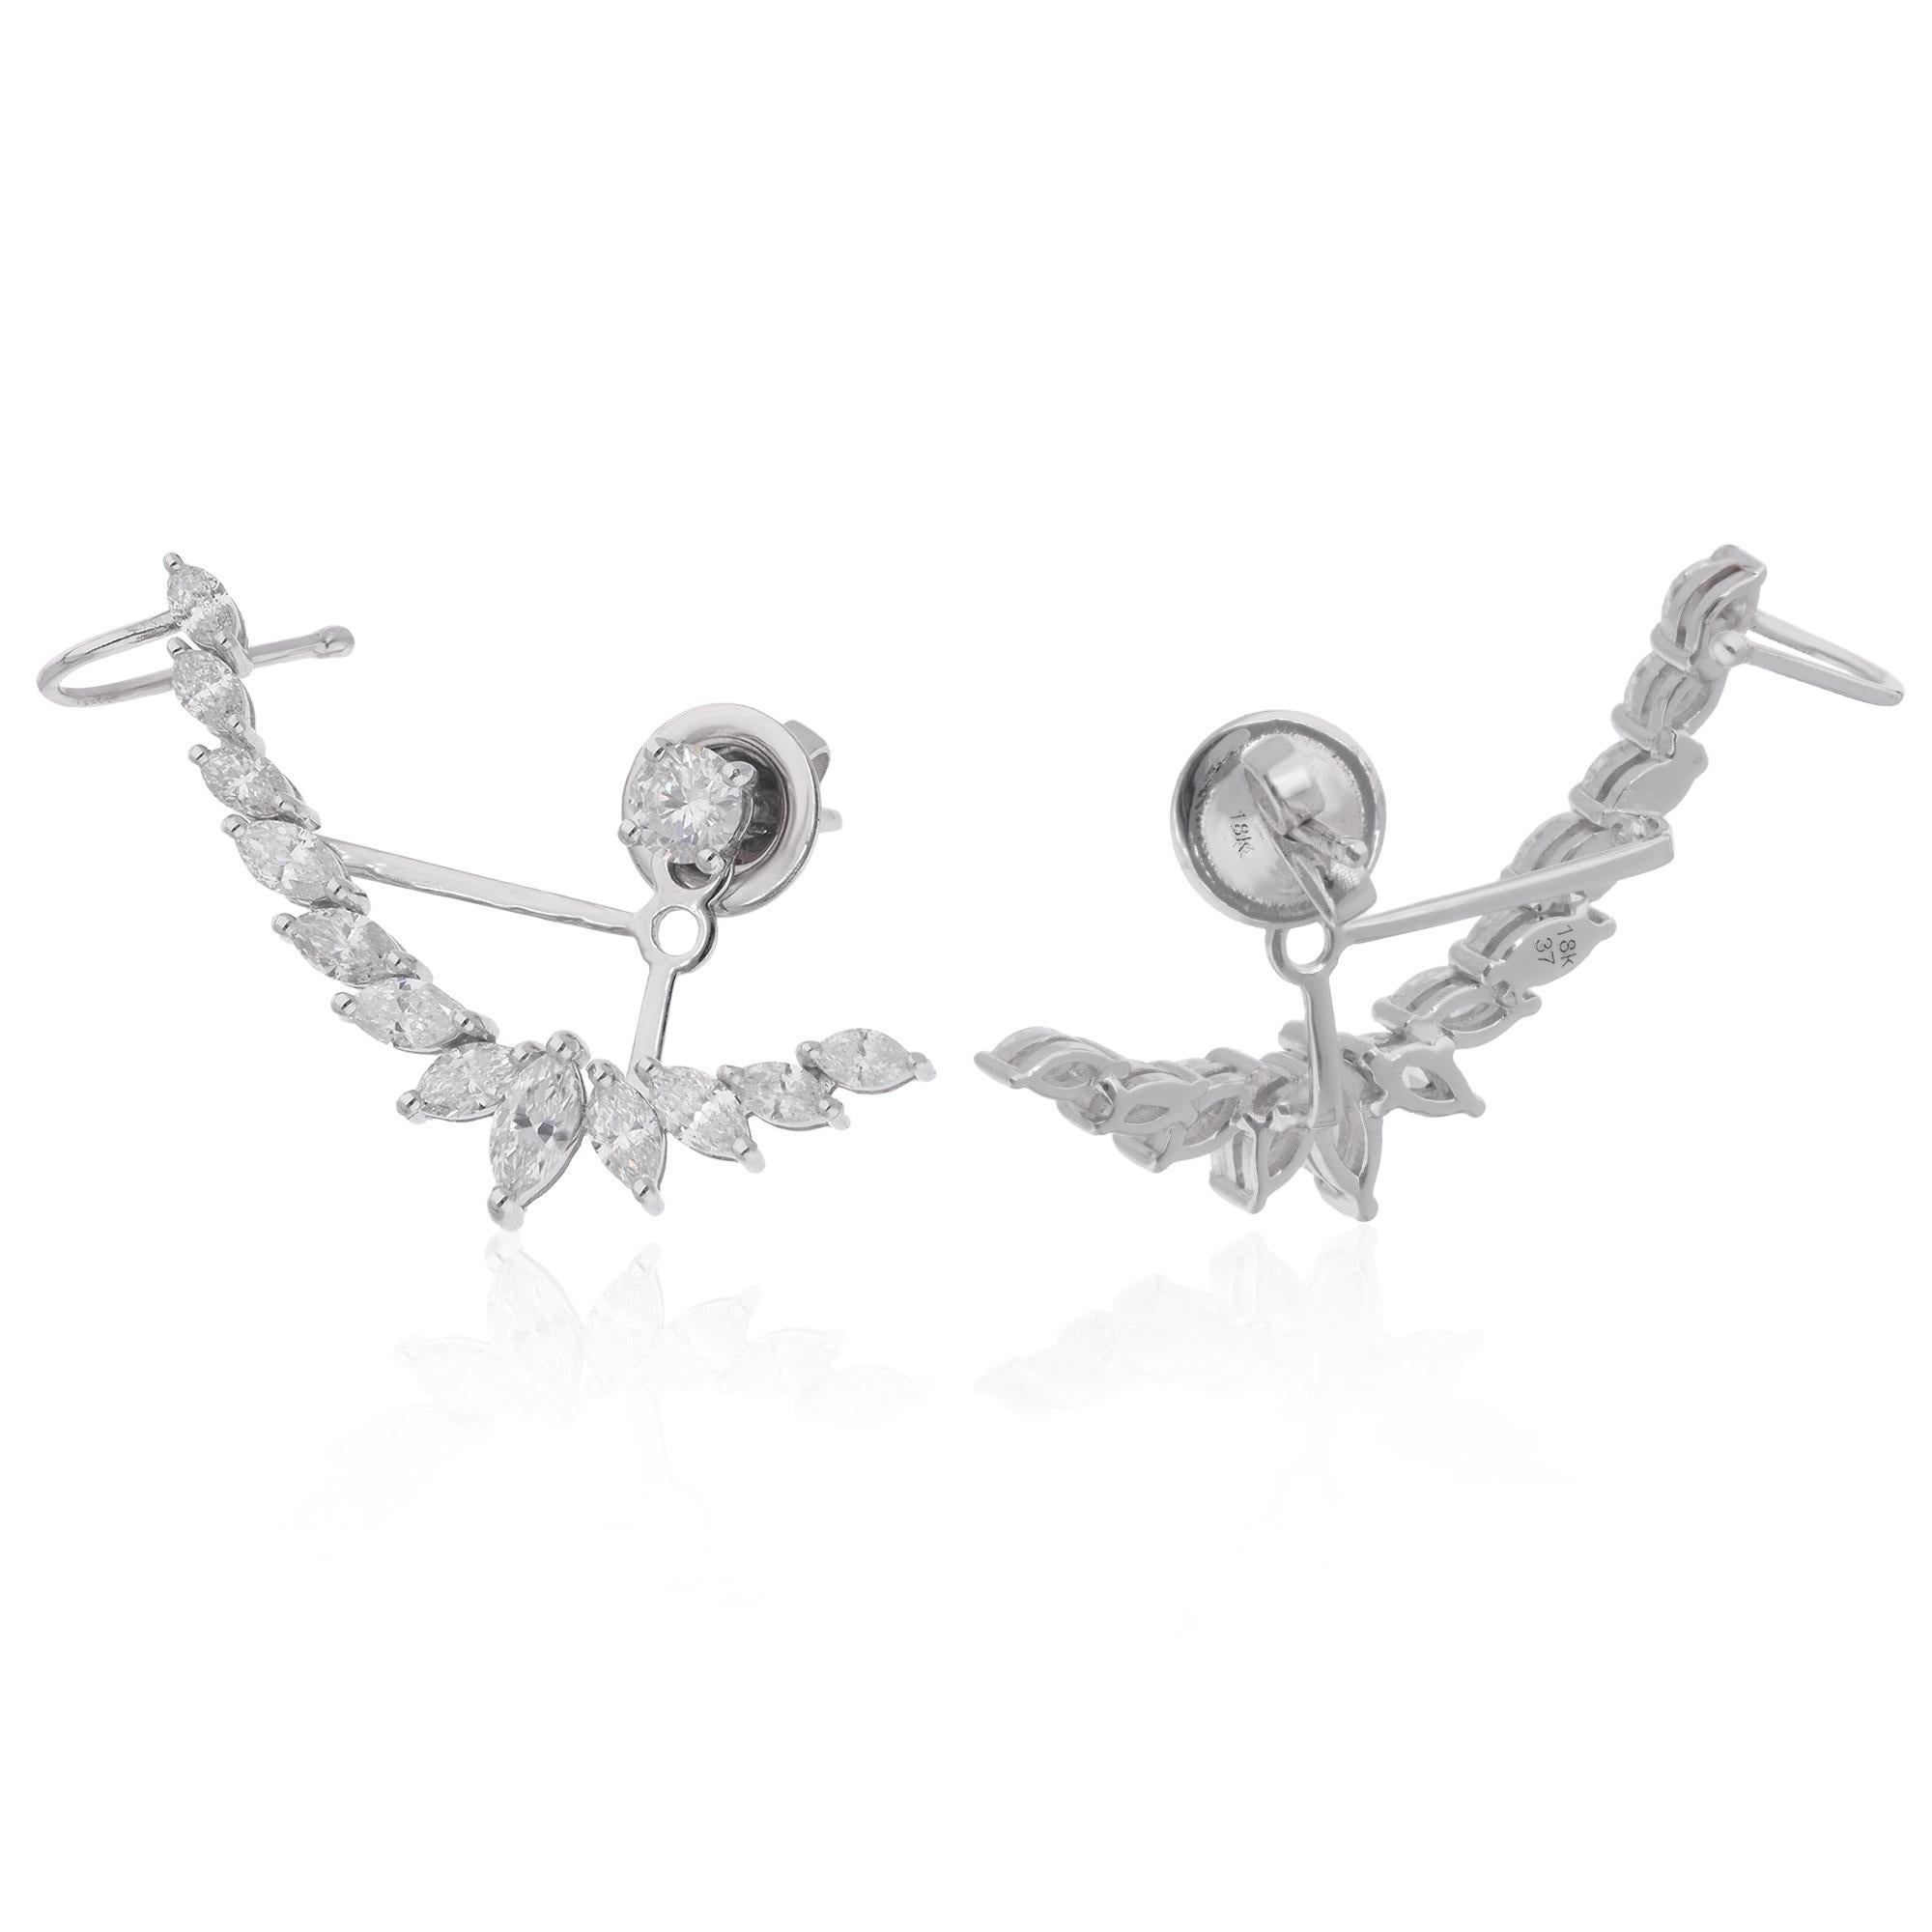 Indulge in the epitome of sophistication and elegance with these Natural 2.26 Carat Marquise & Round Diamond Jacket Earrings, meticulously crafted in 18 karat white gold. These exquisite earrings feature a captivating combination of marquise and